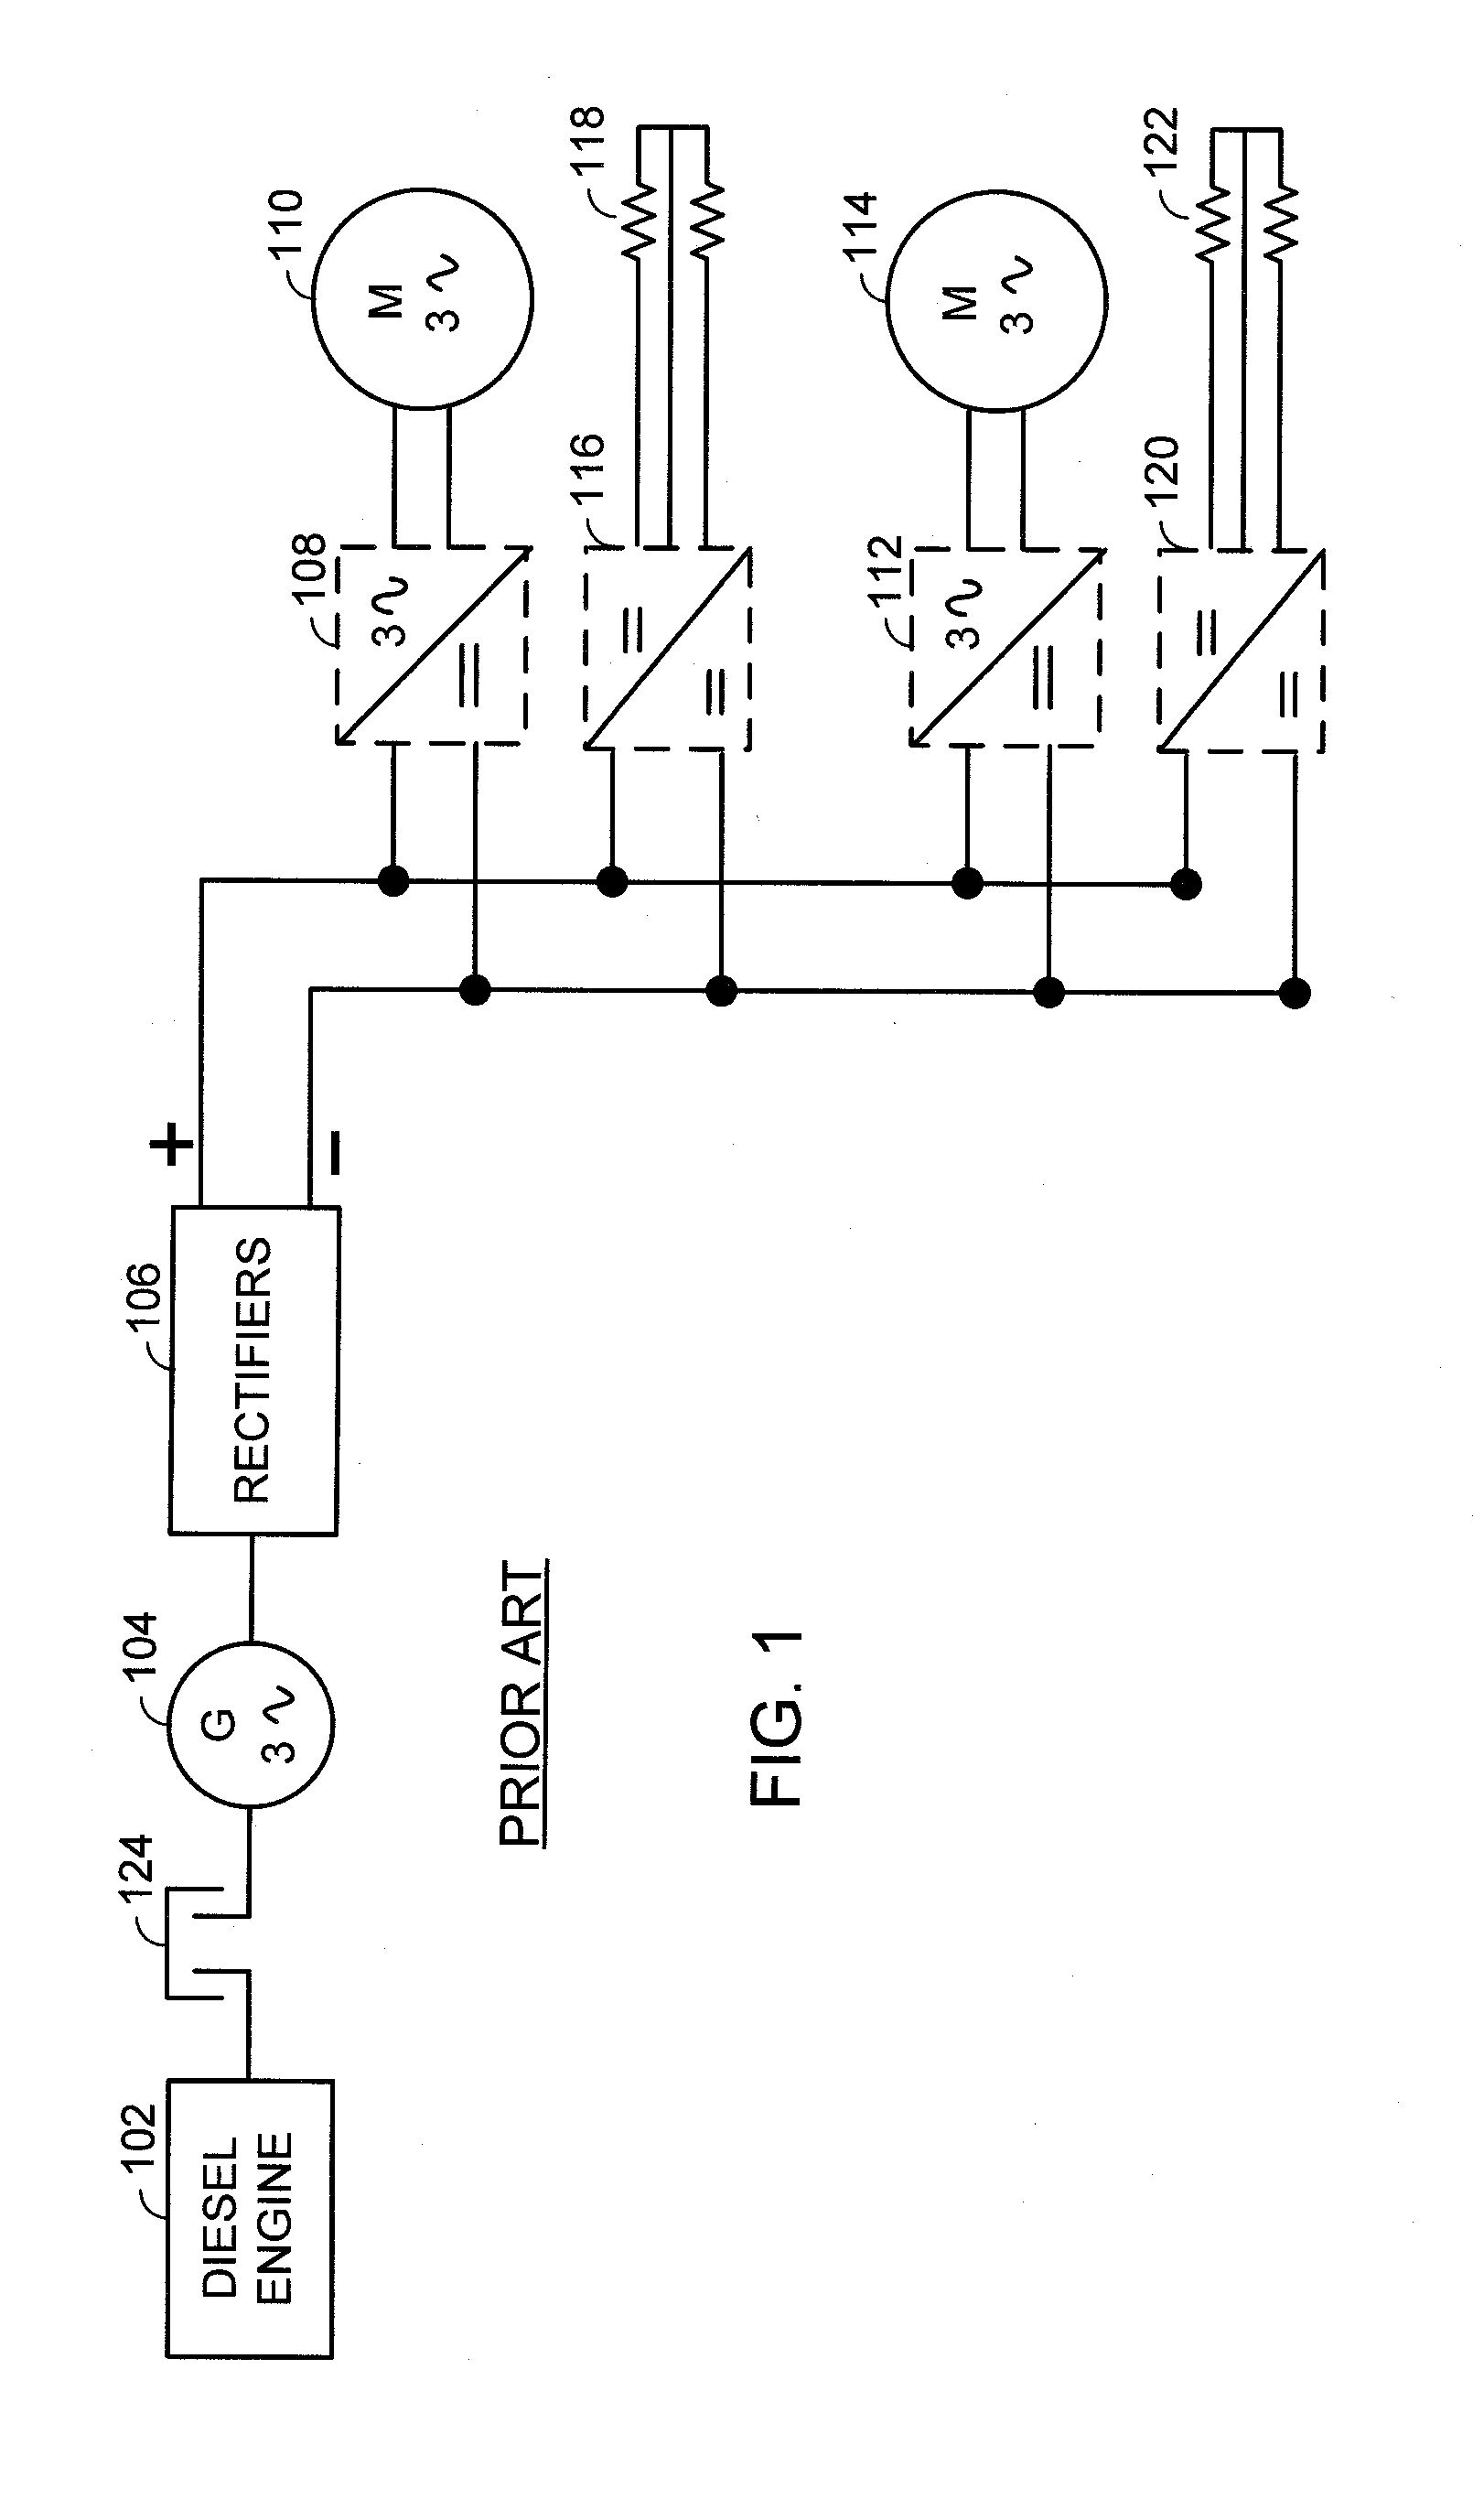 System and Method for All Electrical Operation of a Mining Haul Truck